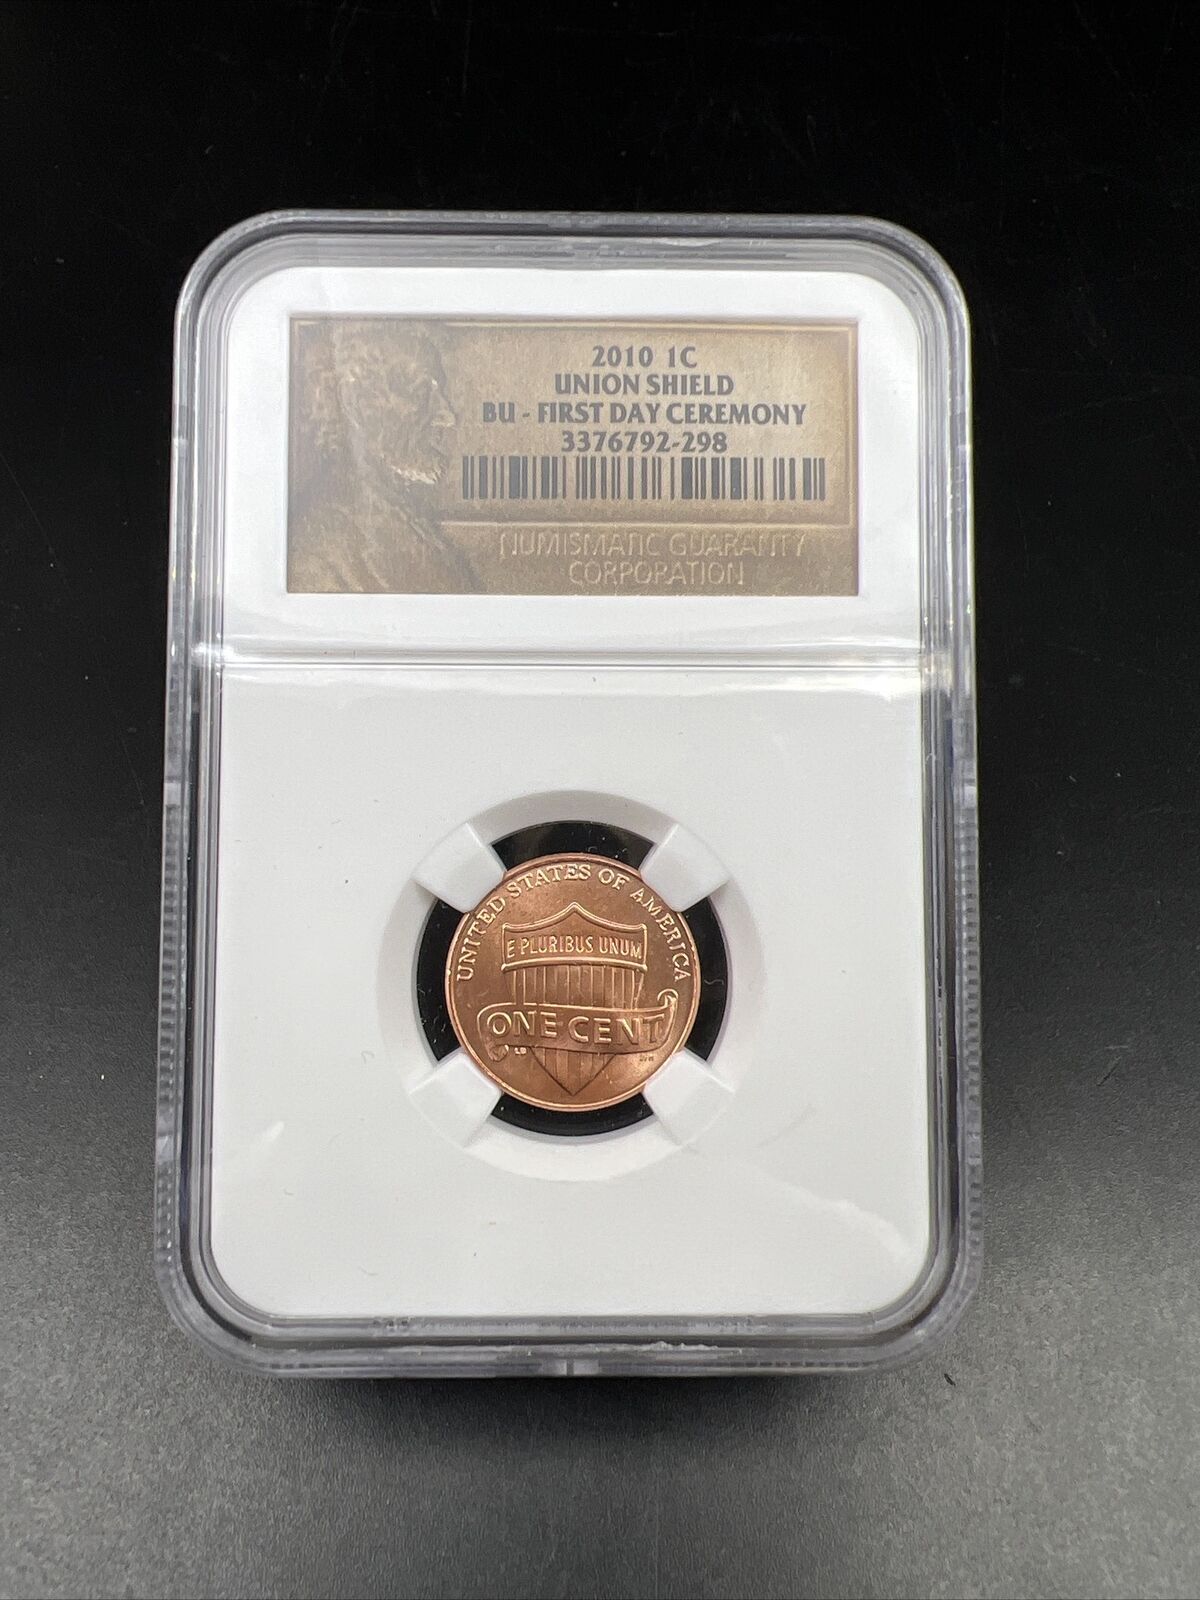 2010 Union Shield 1c Lincoln Cent NGC Certified BU First Day Ceremony